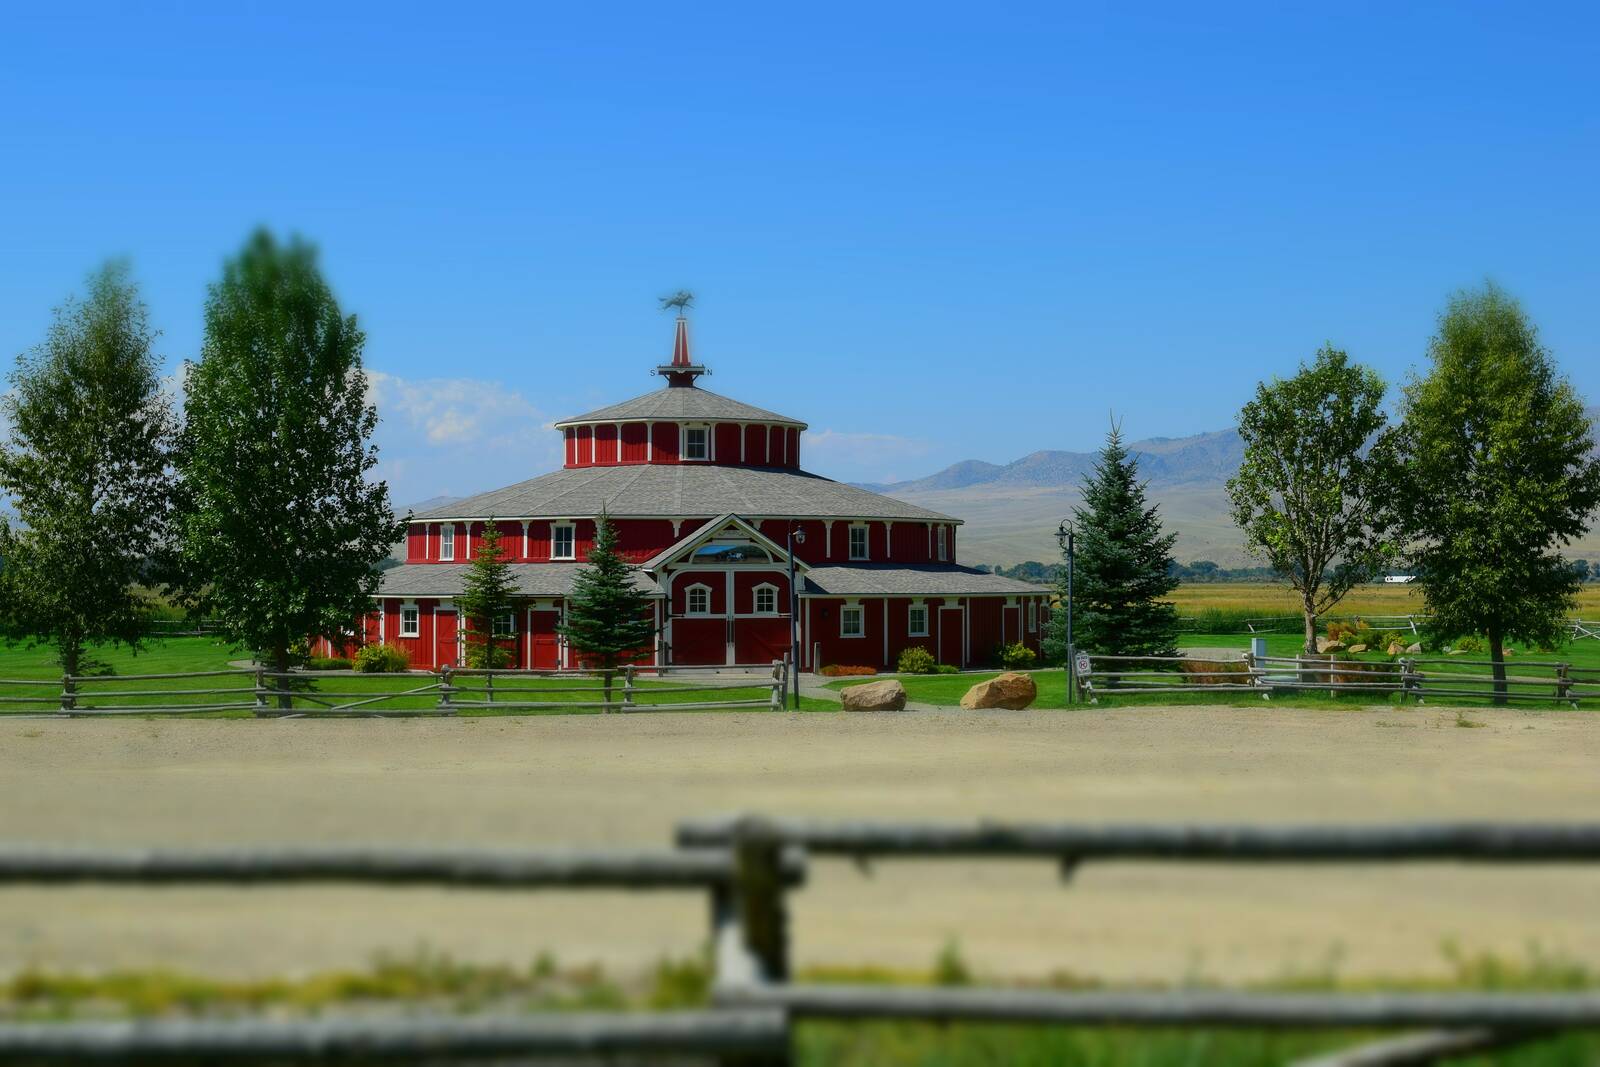 Image of The Round Barn at Twin Bridges, Montana by Steve West